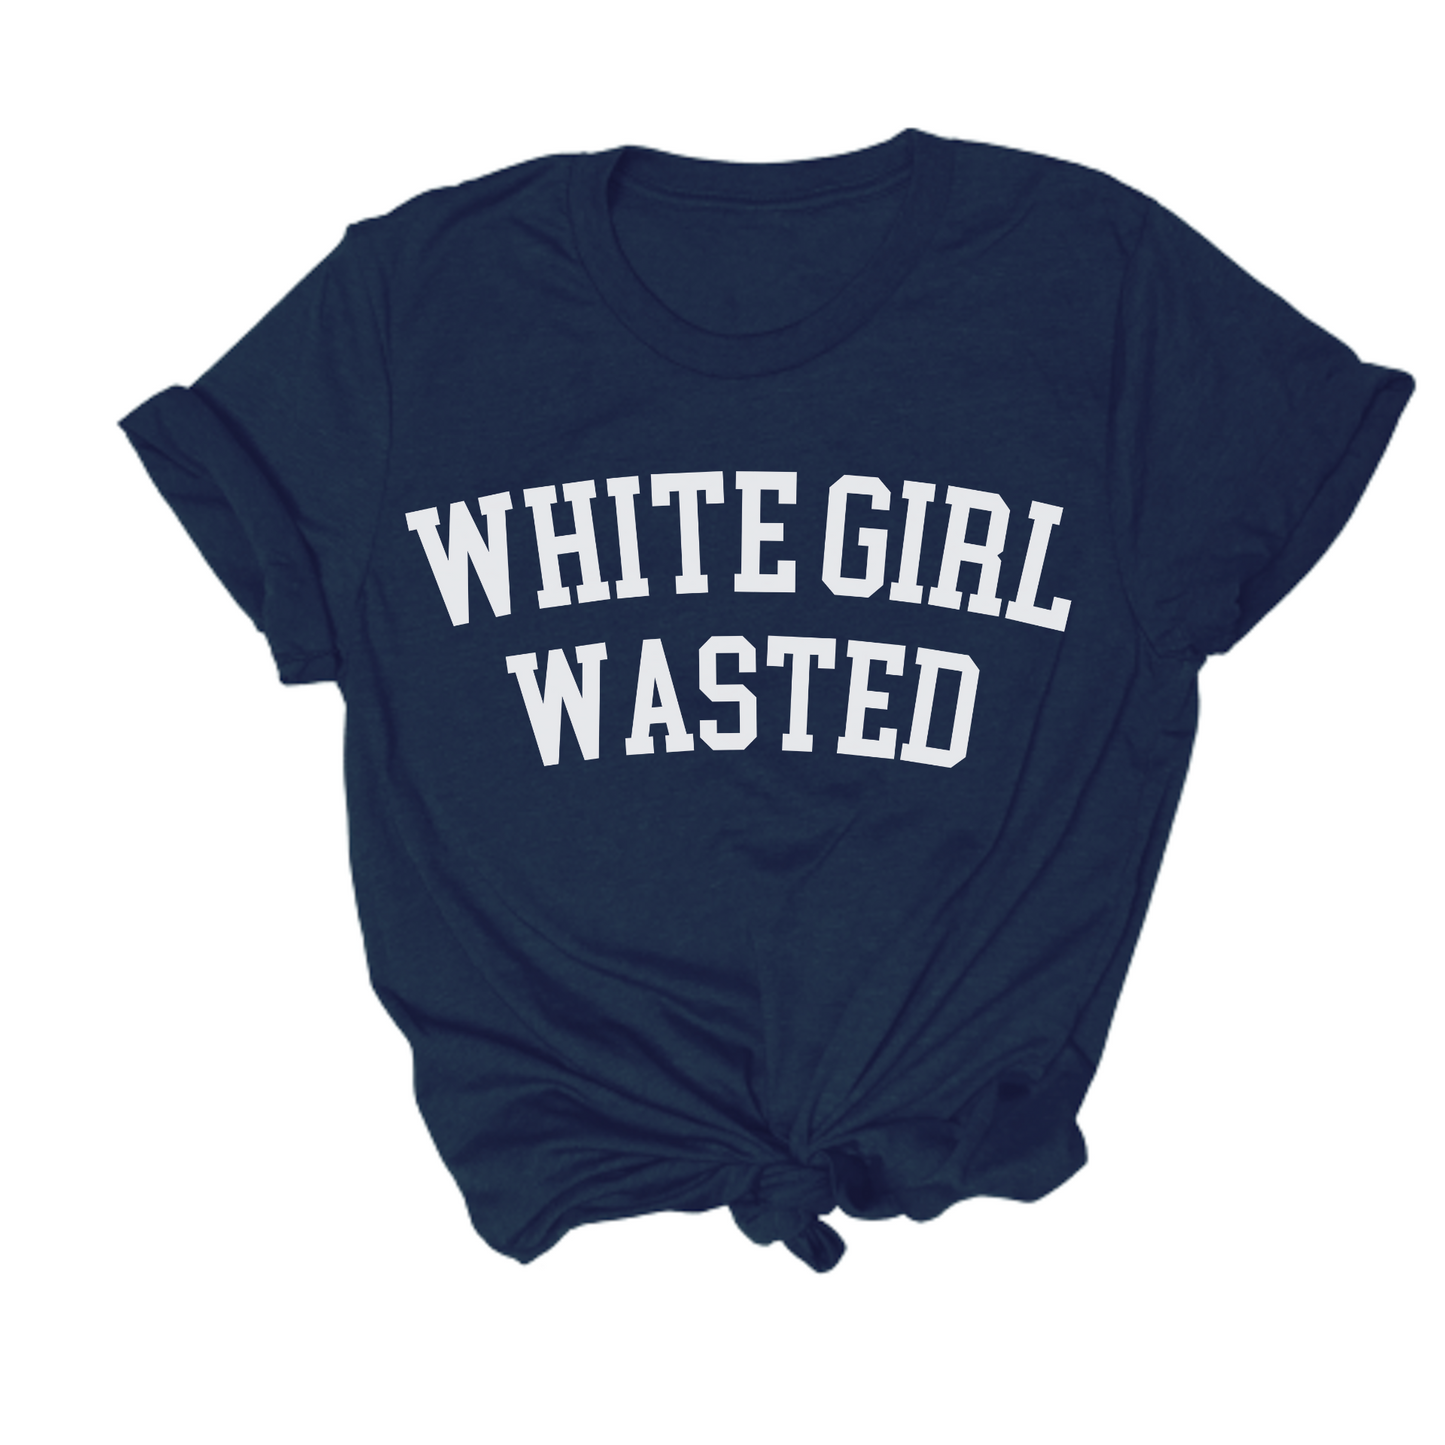 White Girl Wasted Tee